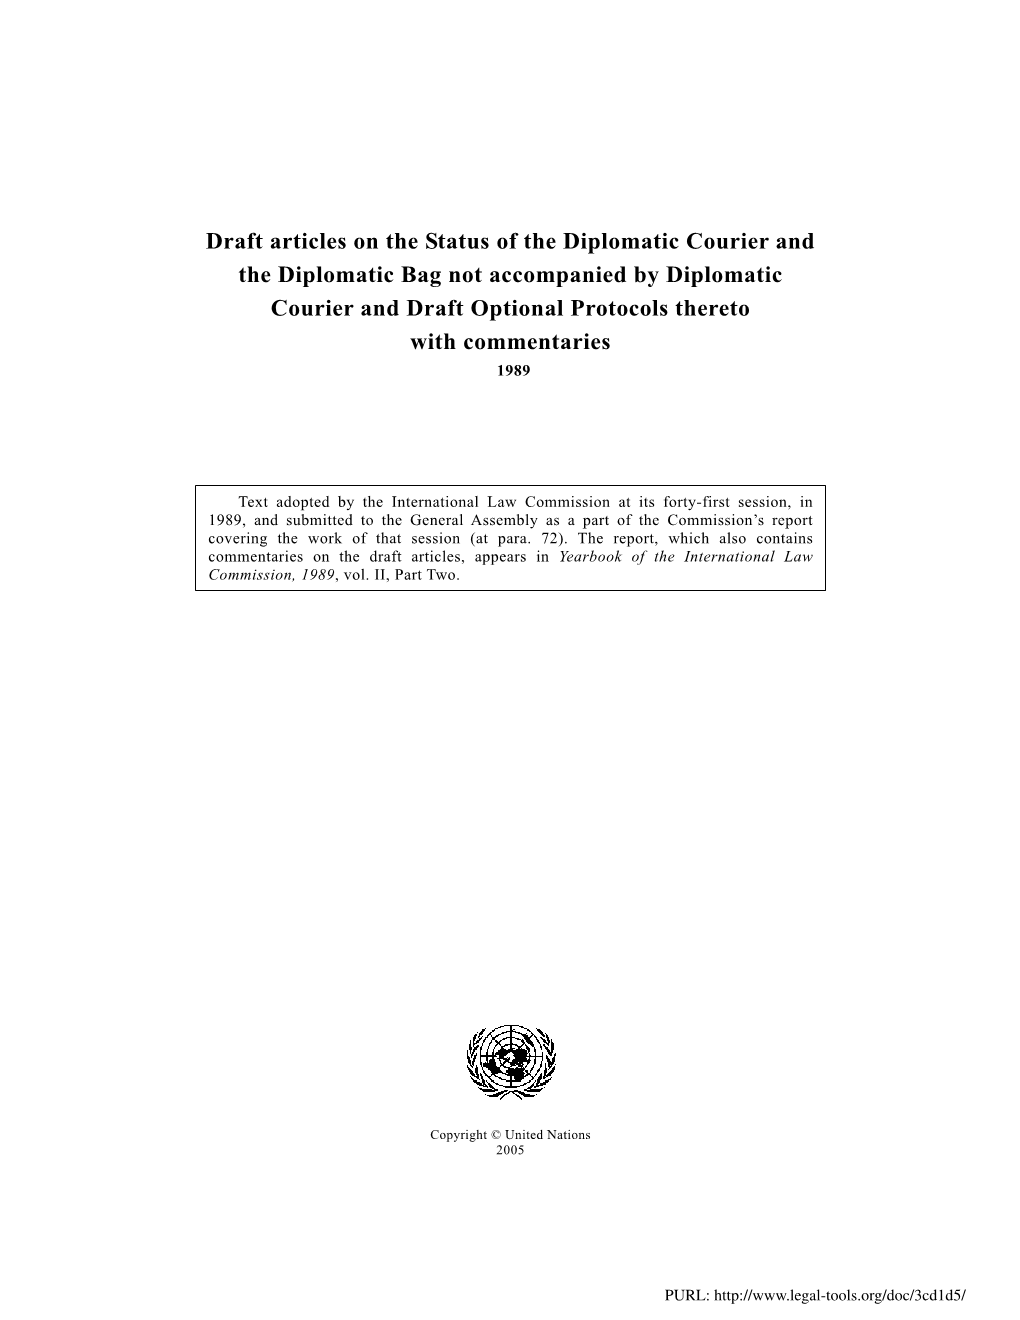 Draft Articles on the Status of the Diplomatic